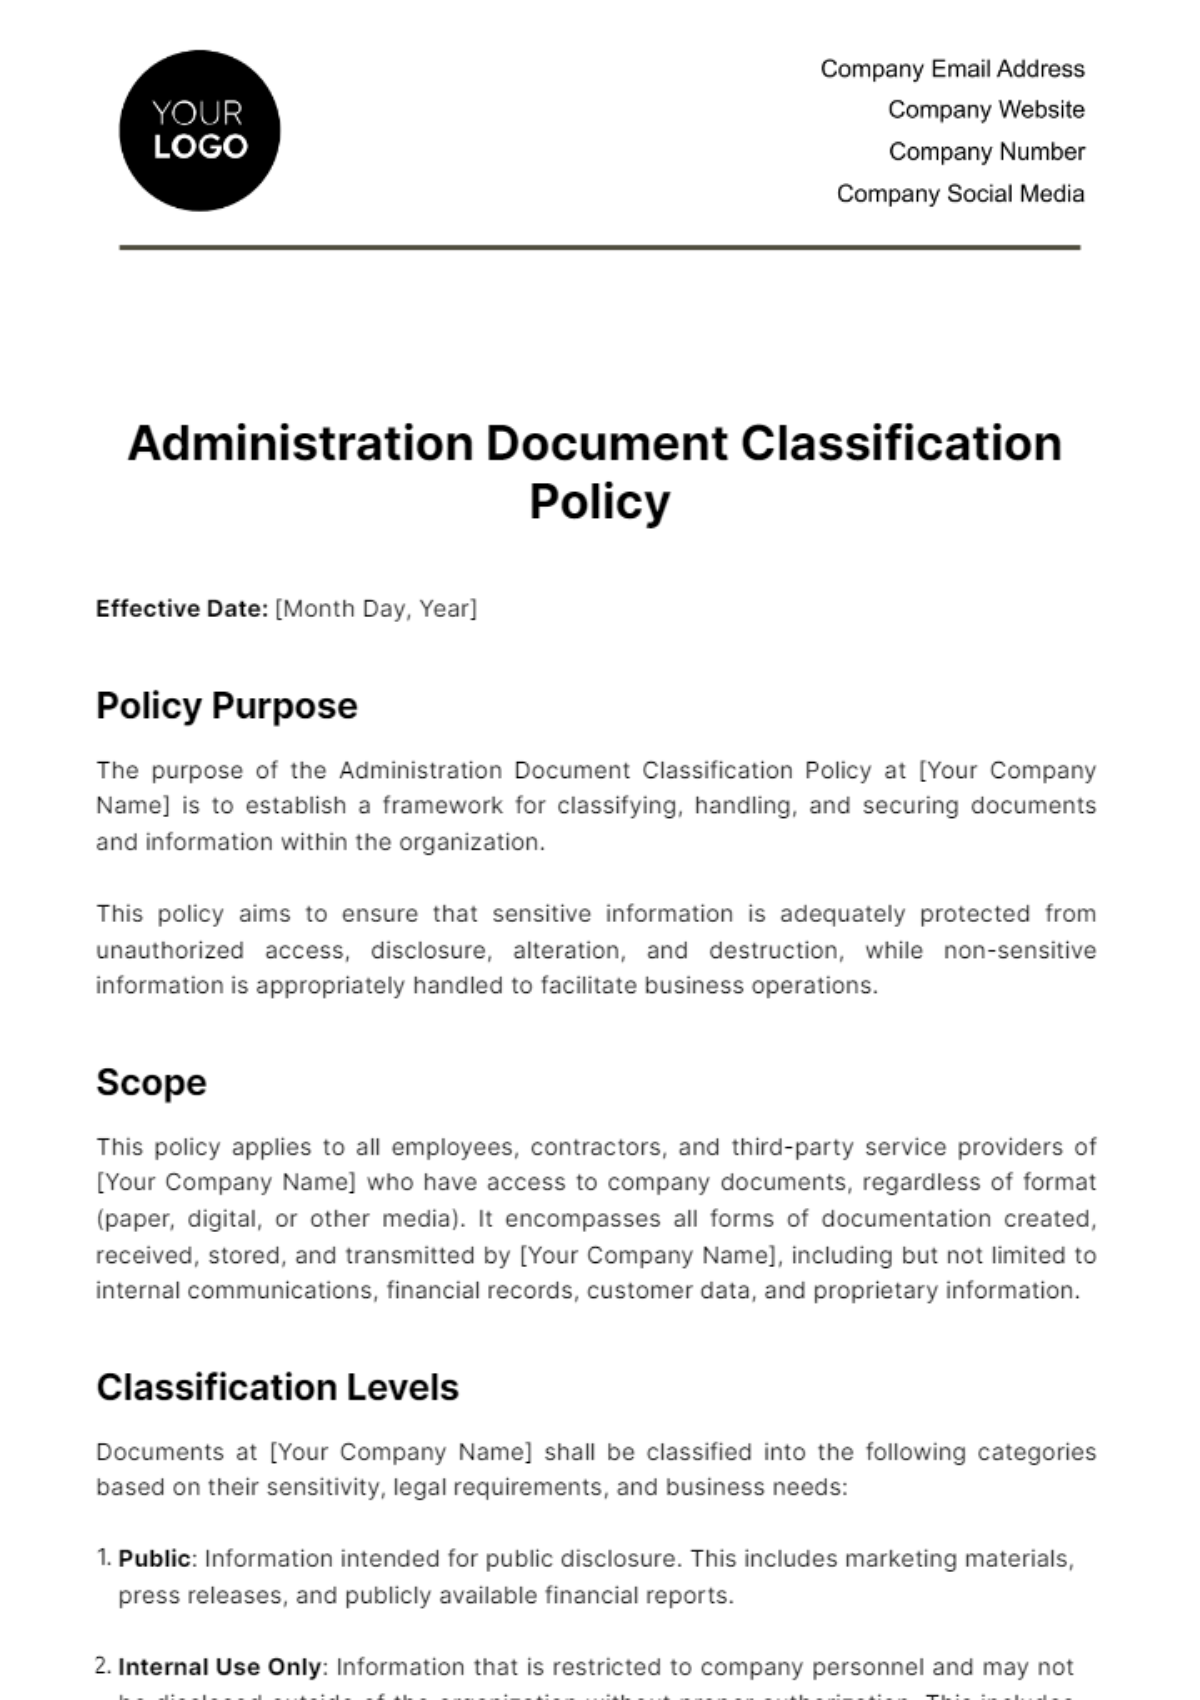 Free Administration Document Classification Policy Template